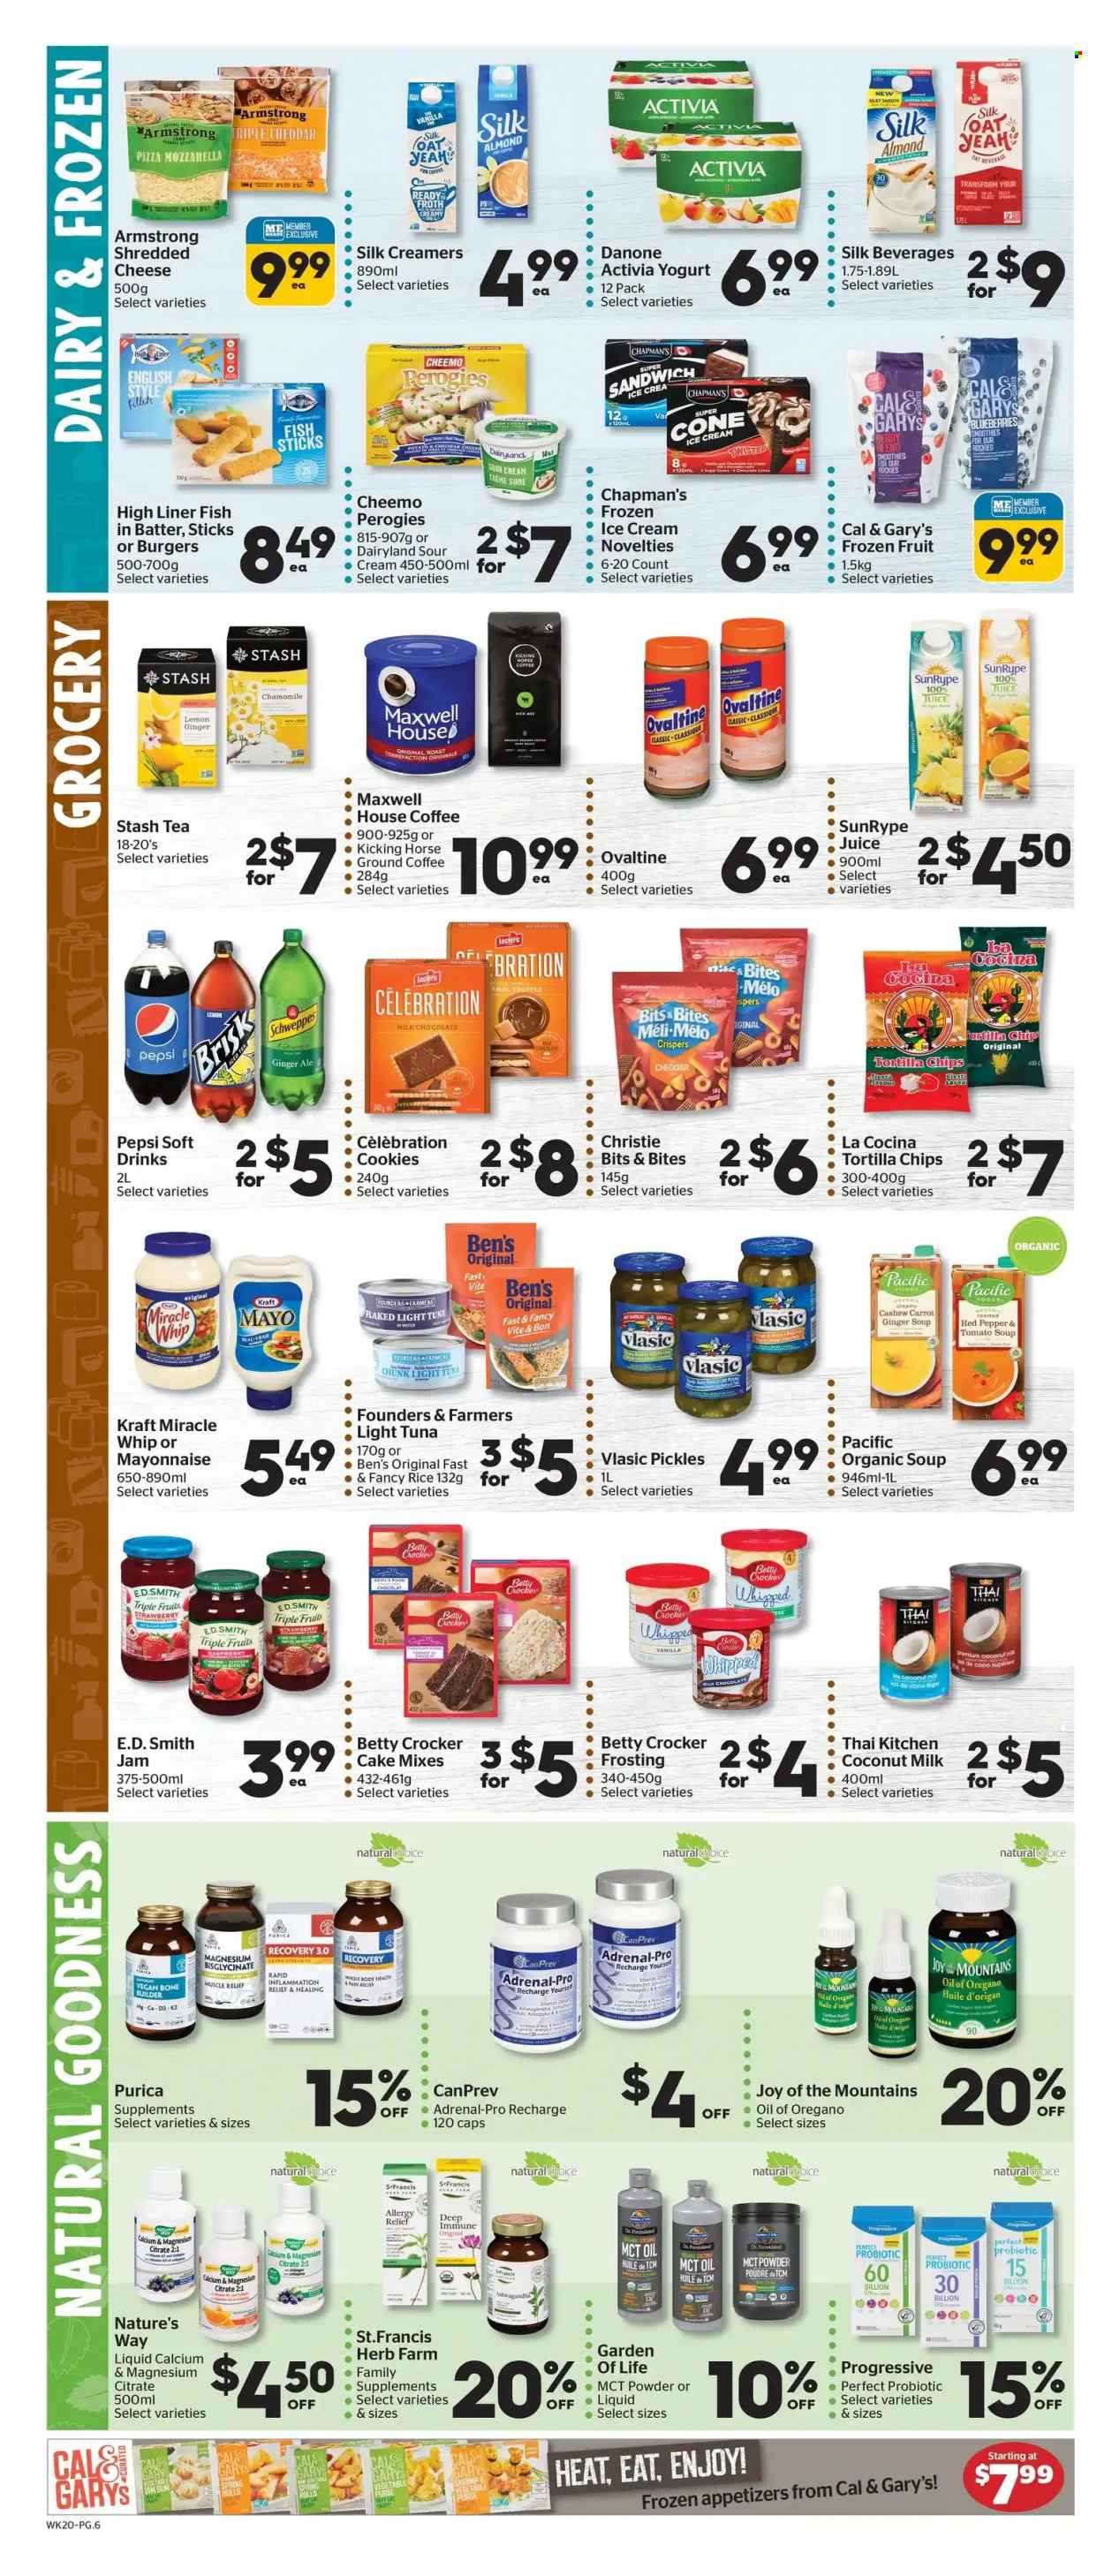 thumbnail - Calgary Co-op Flyer - March 16, 2023 - March 22, 2023 - Sales products - cake, garlic, blueberries, tuna, fish, fish fingers, fish sticks, tomato soup, pizza, sandwich, soup, Kraft®, roast, shredded cheese, cheese, yoghurt, Activia, sour cream, mayonnaise, Miracle Whip, ice cream, cookies, milk chocolate, truffles, Celebration, tortilla chips, frosting, coconut milk, tuna in water, pickles, light tuna, rice, fruit jam, ginger ale, Schweppes, Pepsi, juice, ice tea, soft drink, smoothie, water, Maxwell House, ground coffee, Joy, Sure, pain relief, magnesium, calcium, Danone, Twister. Page 7.